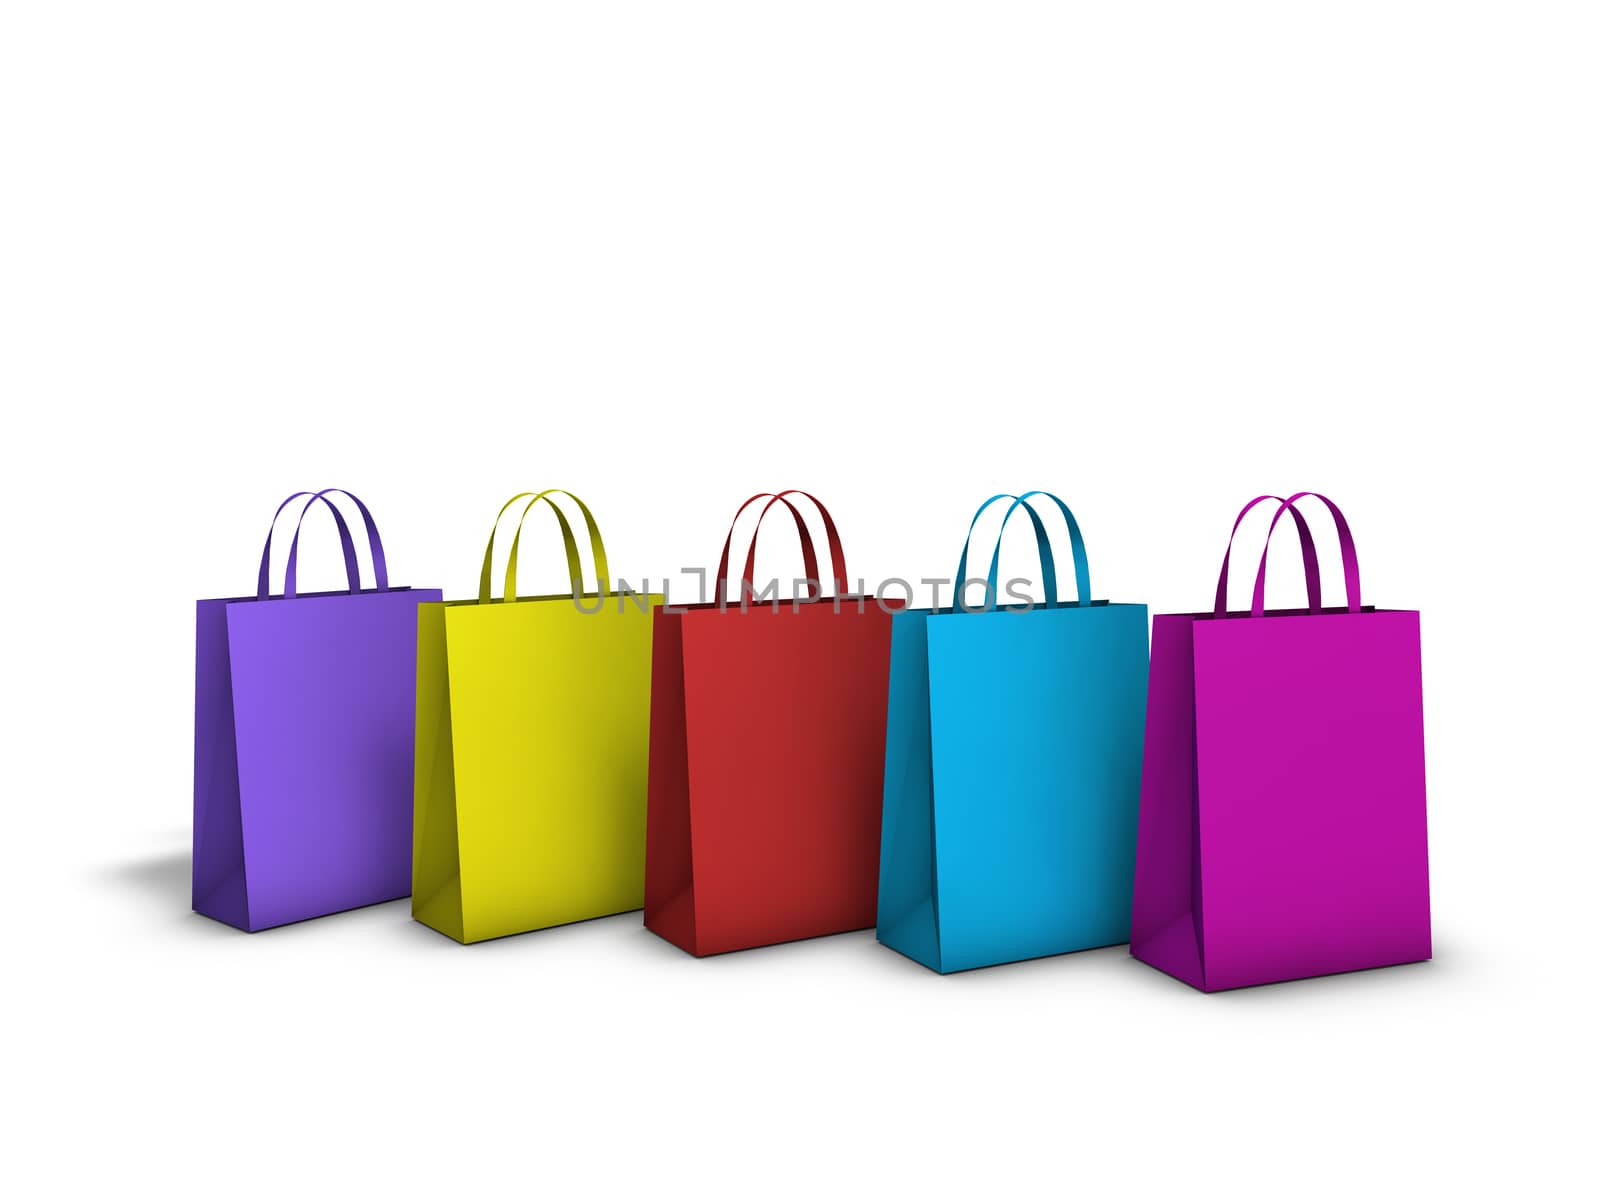 Colourful Shopping Bags by nirodesign